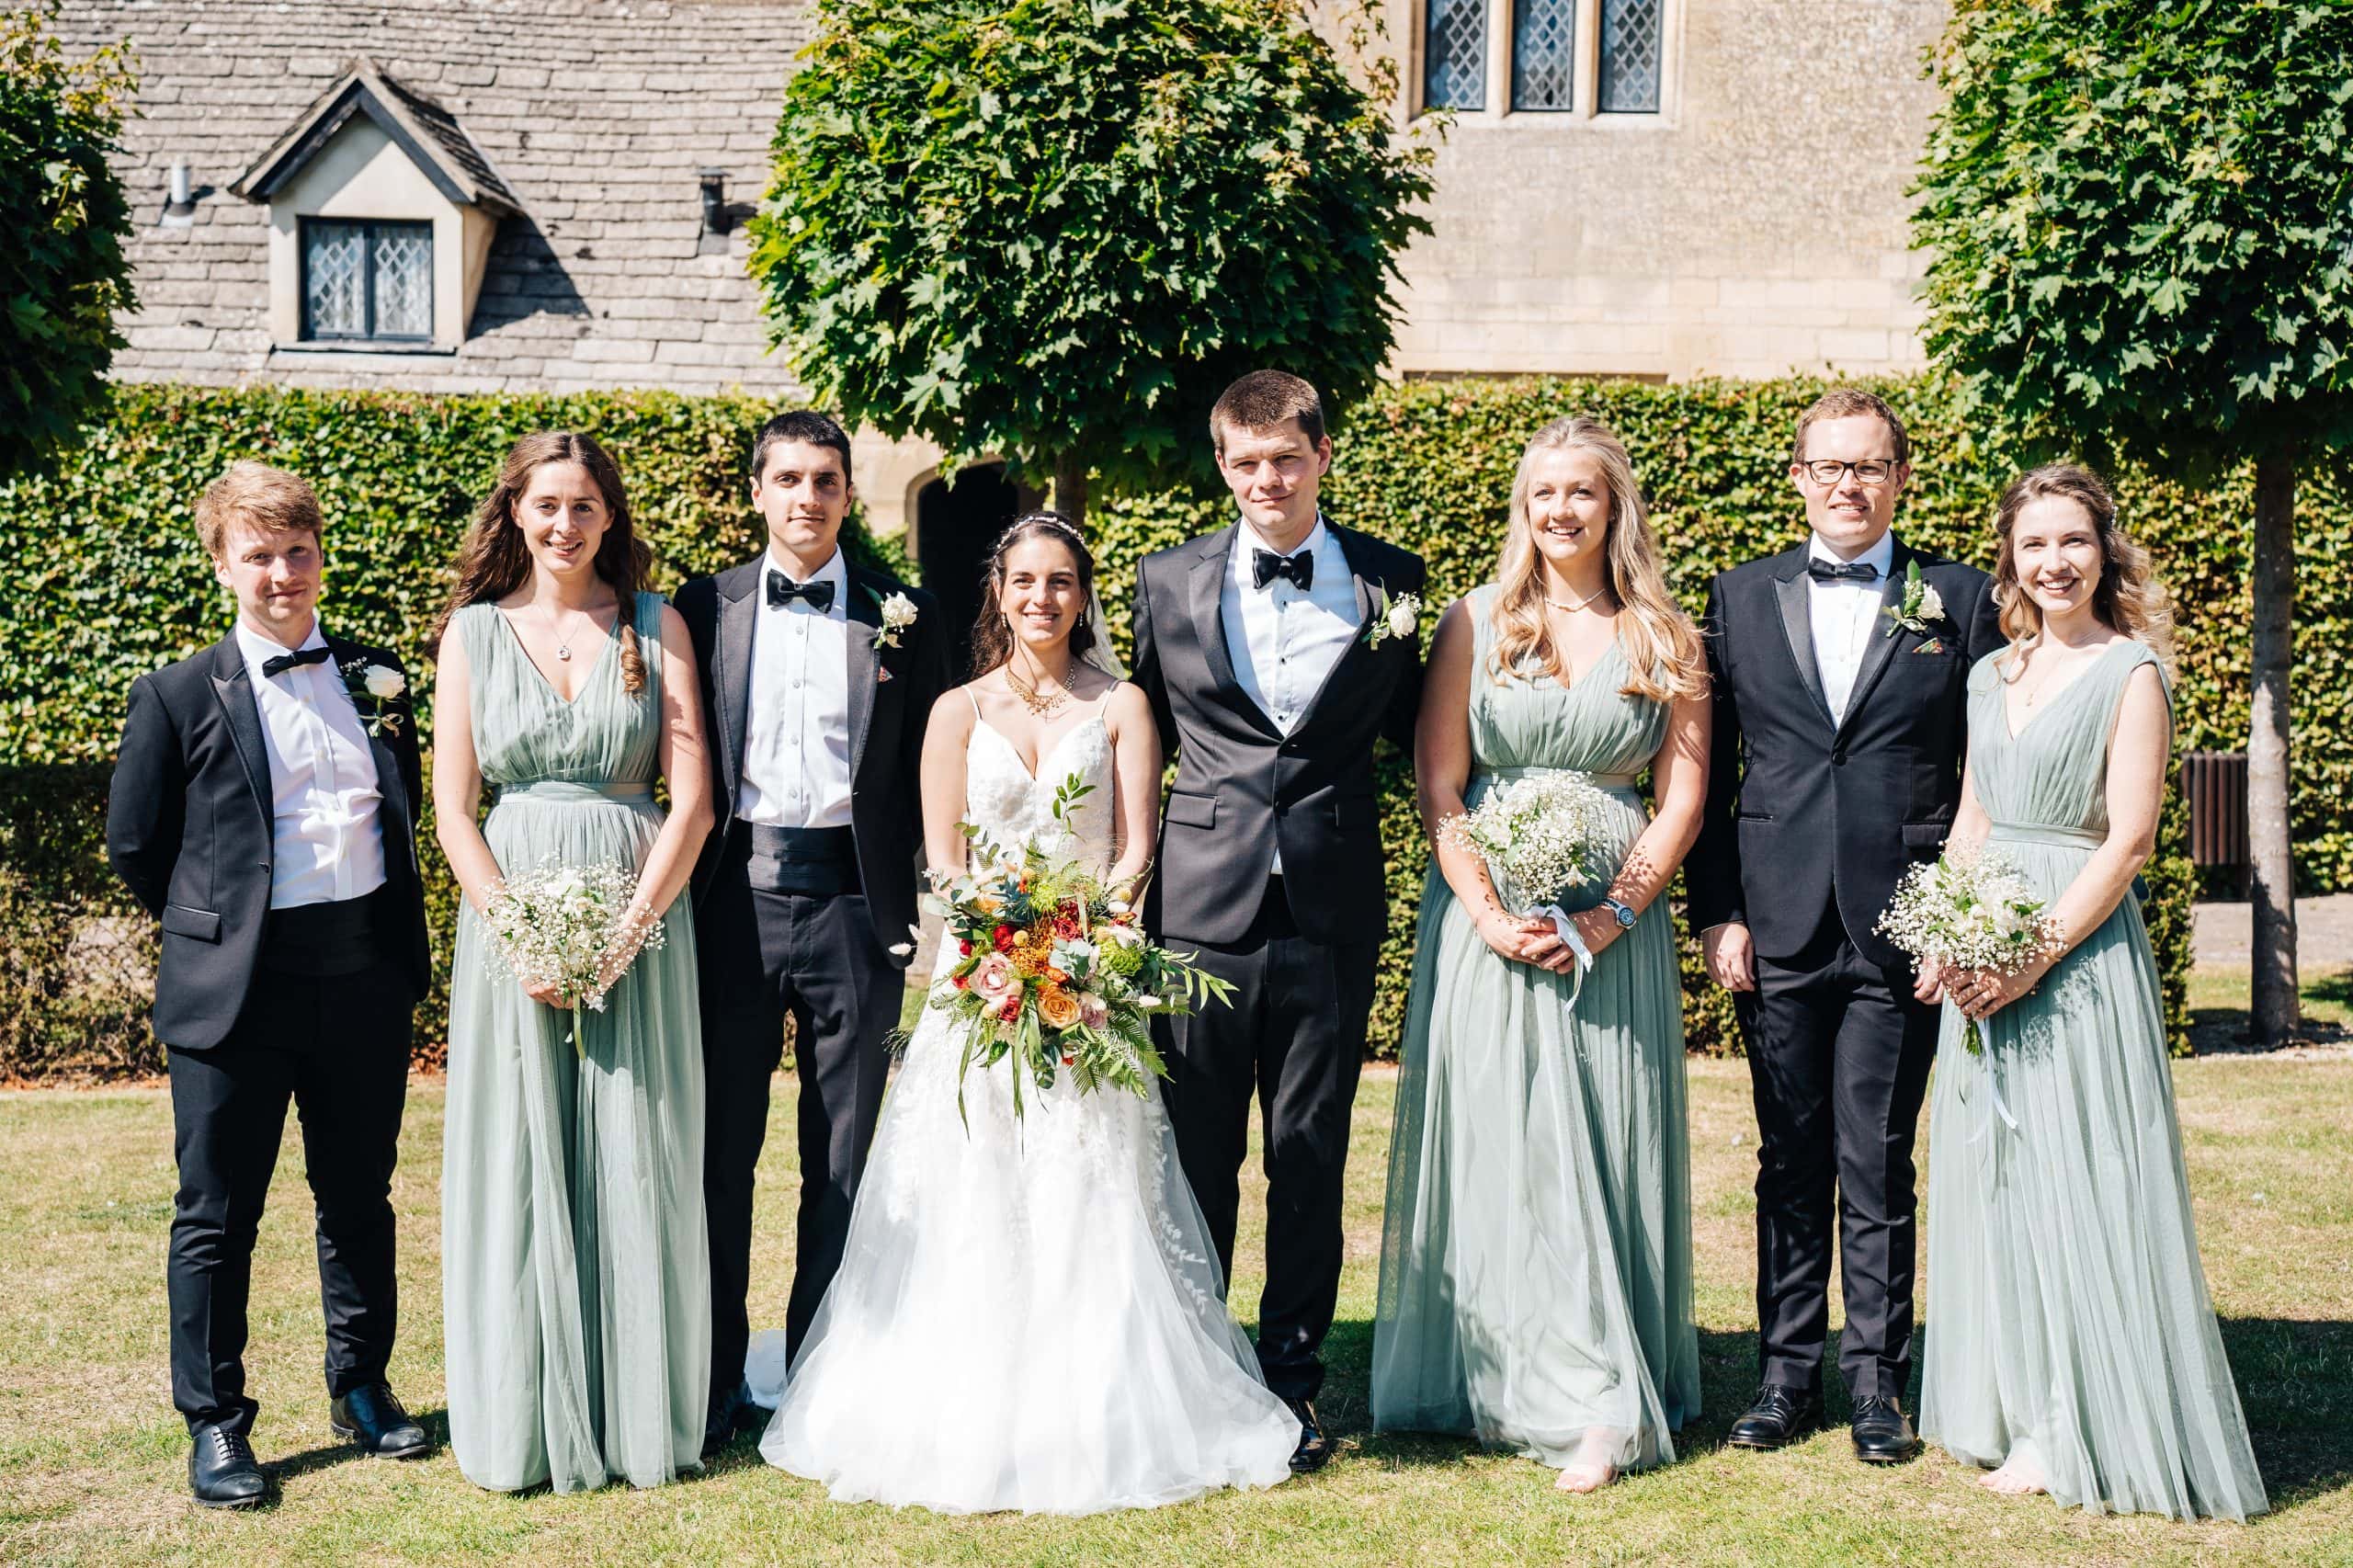 A wedding family portrait shot on the lawn outside the dining hall at Ellenborough Park Hotel, Cheltenham